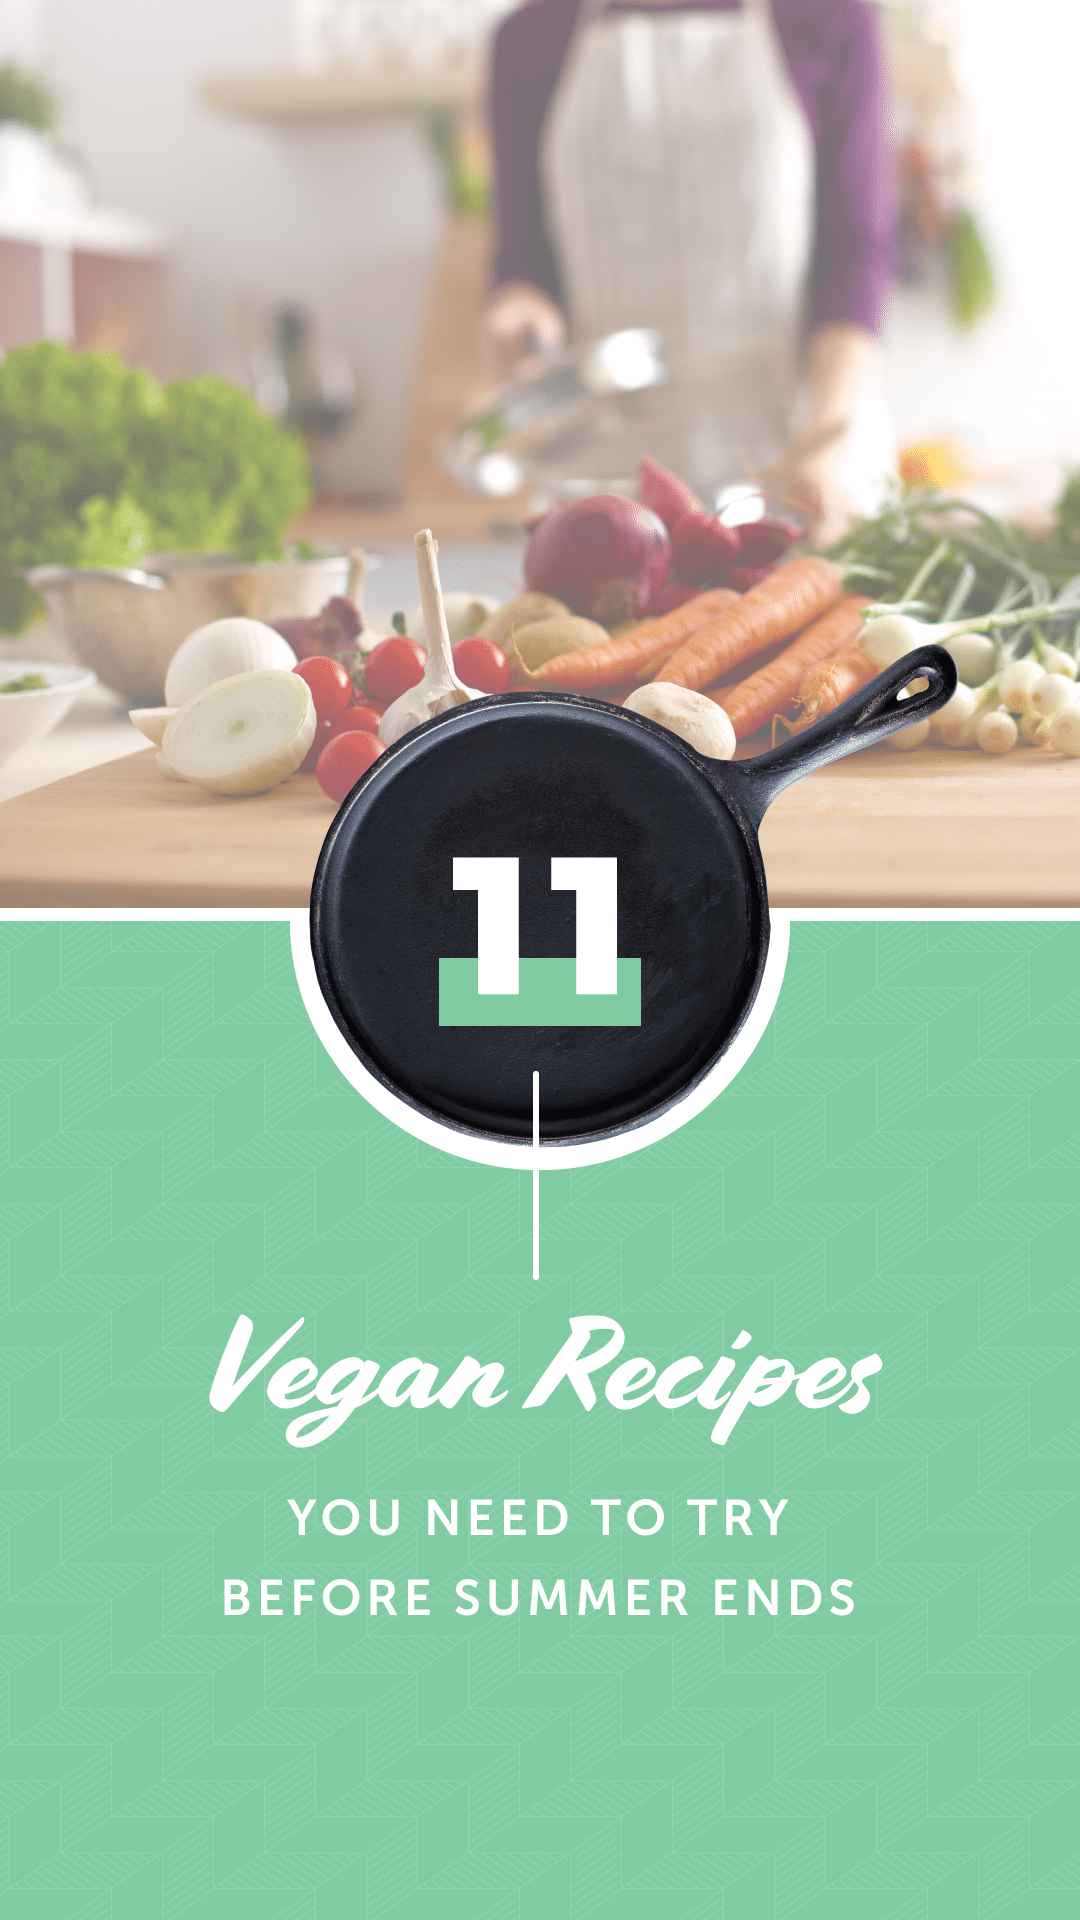 11 Vegan Recipes You Need to Try Before Summer Ends